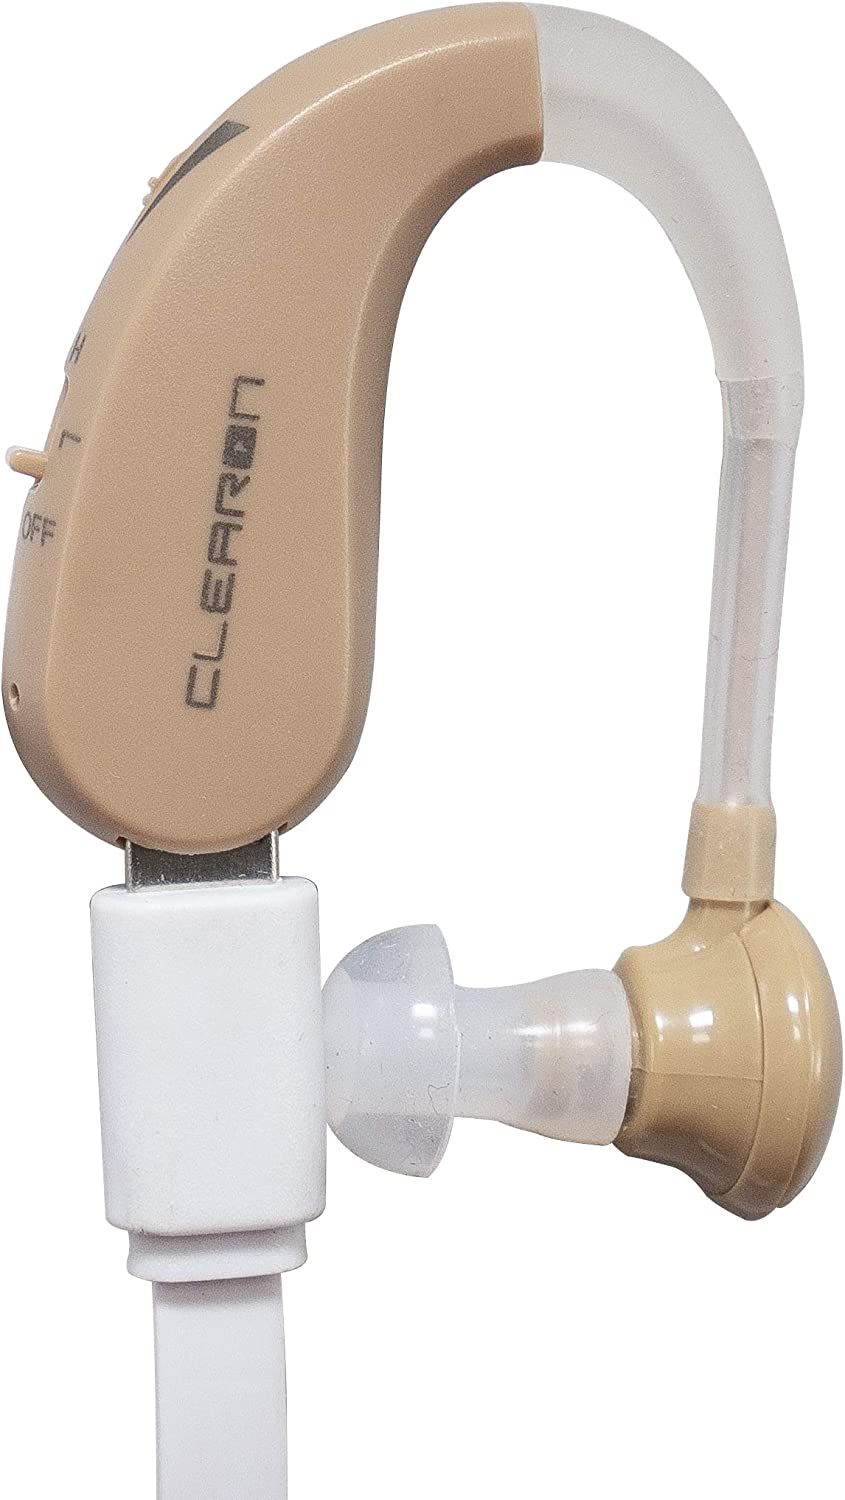 Clearon Audiologist Designed Rechargeable Hearing Amplifier